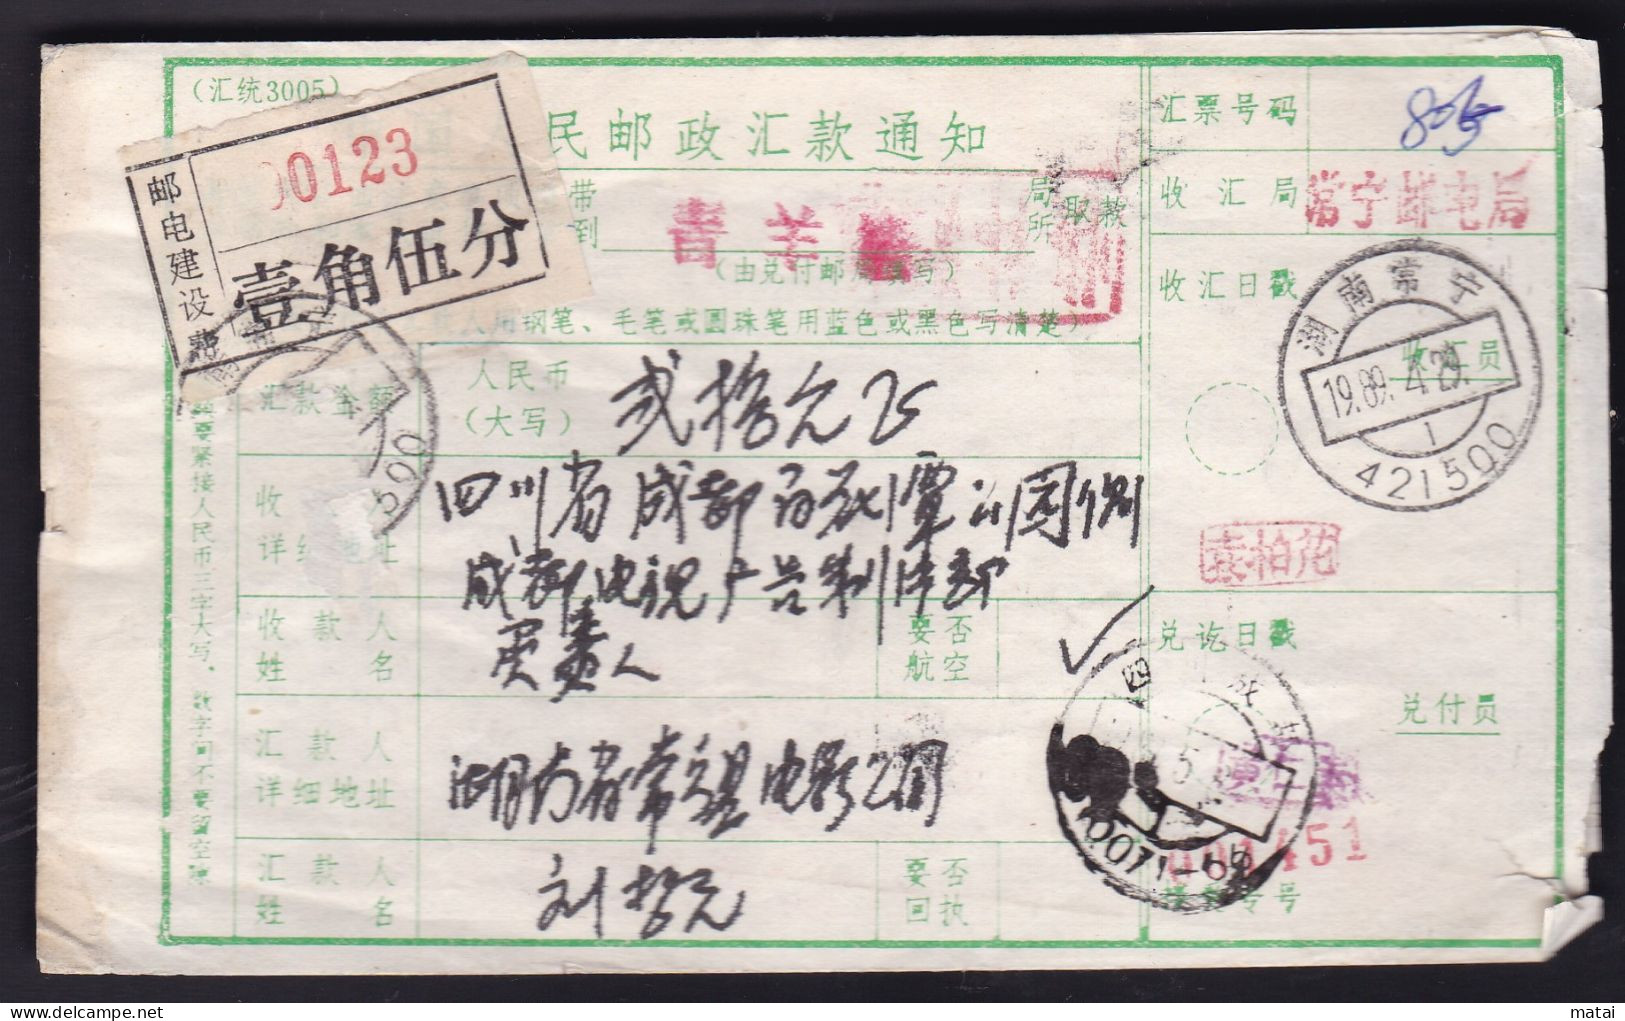 CHINA CHINE CINA COVER WITH HUNAN CHANGNING 421500  ADDED CHARGE LABEL (ACL) 0.15 YUAN - Lettres & Documents